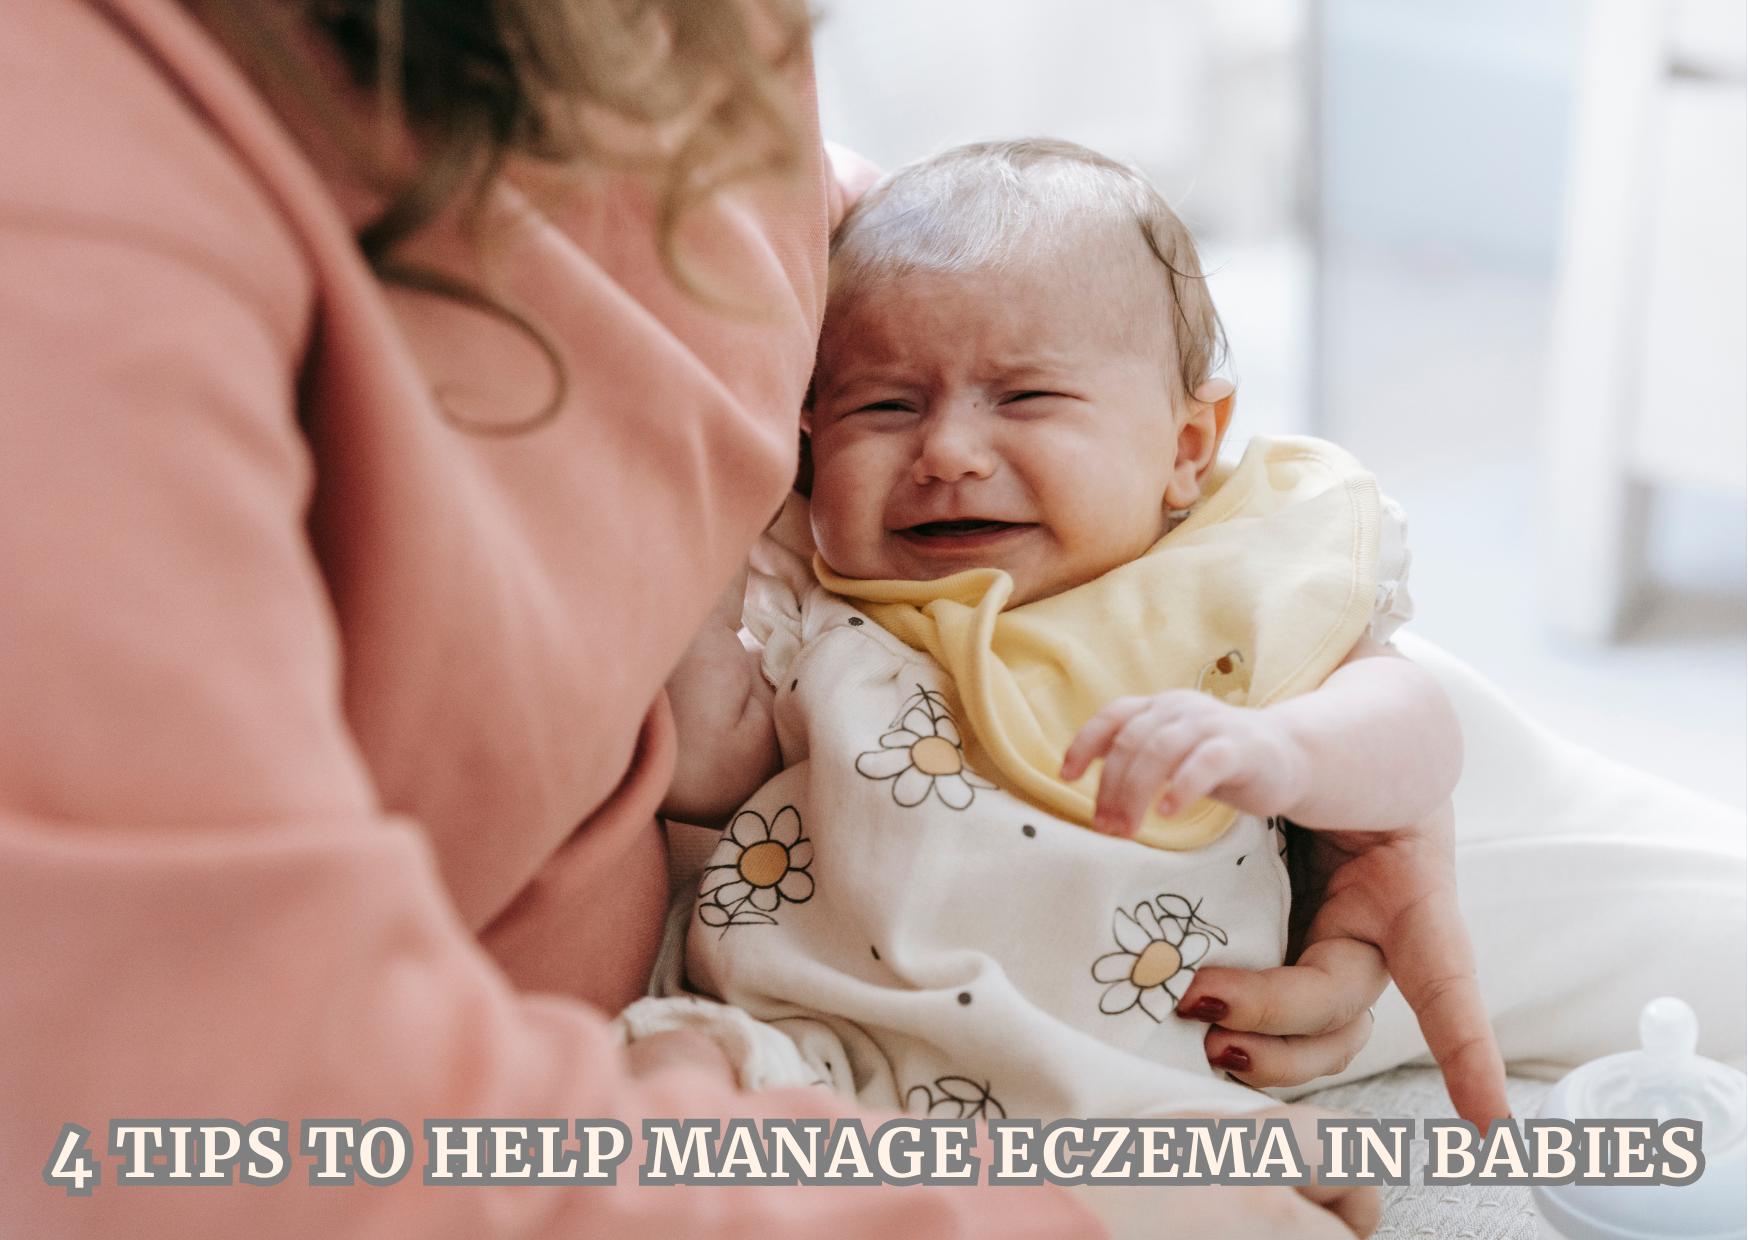 4 Tips to Help Manage Eczema in Babies